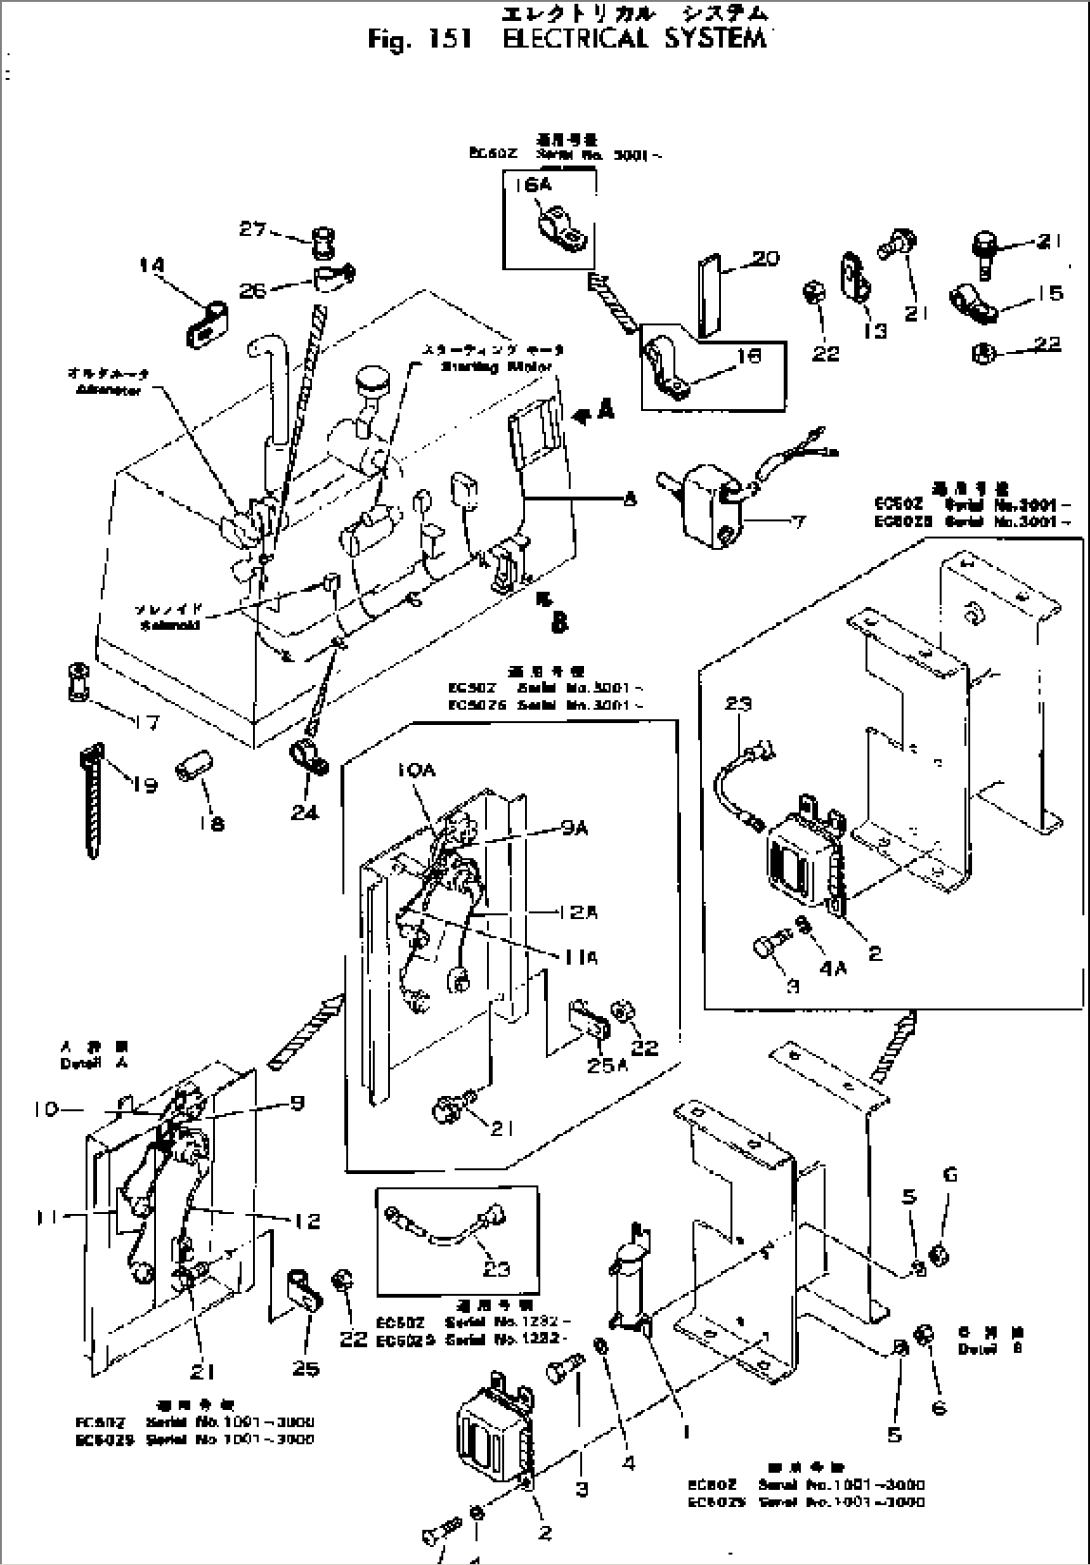 ELECTRICAL SYSTEM(#1001-)